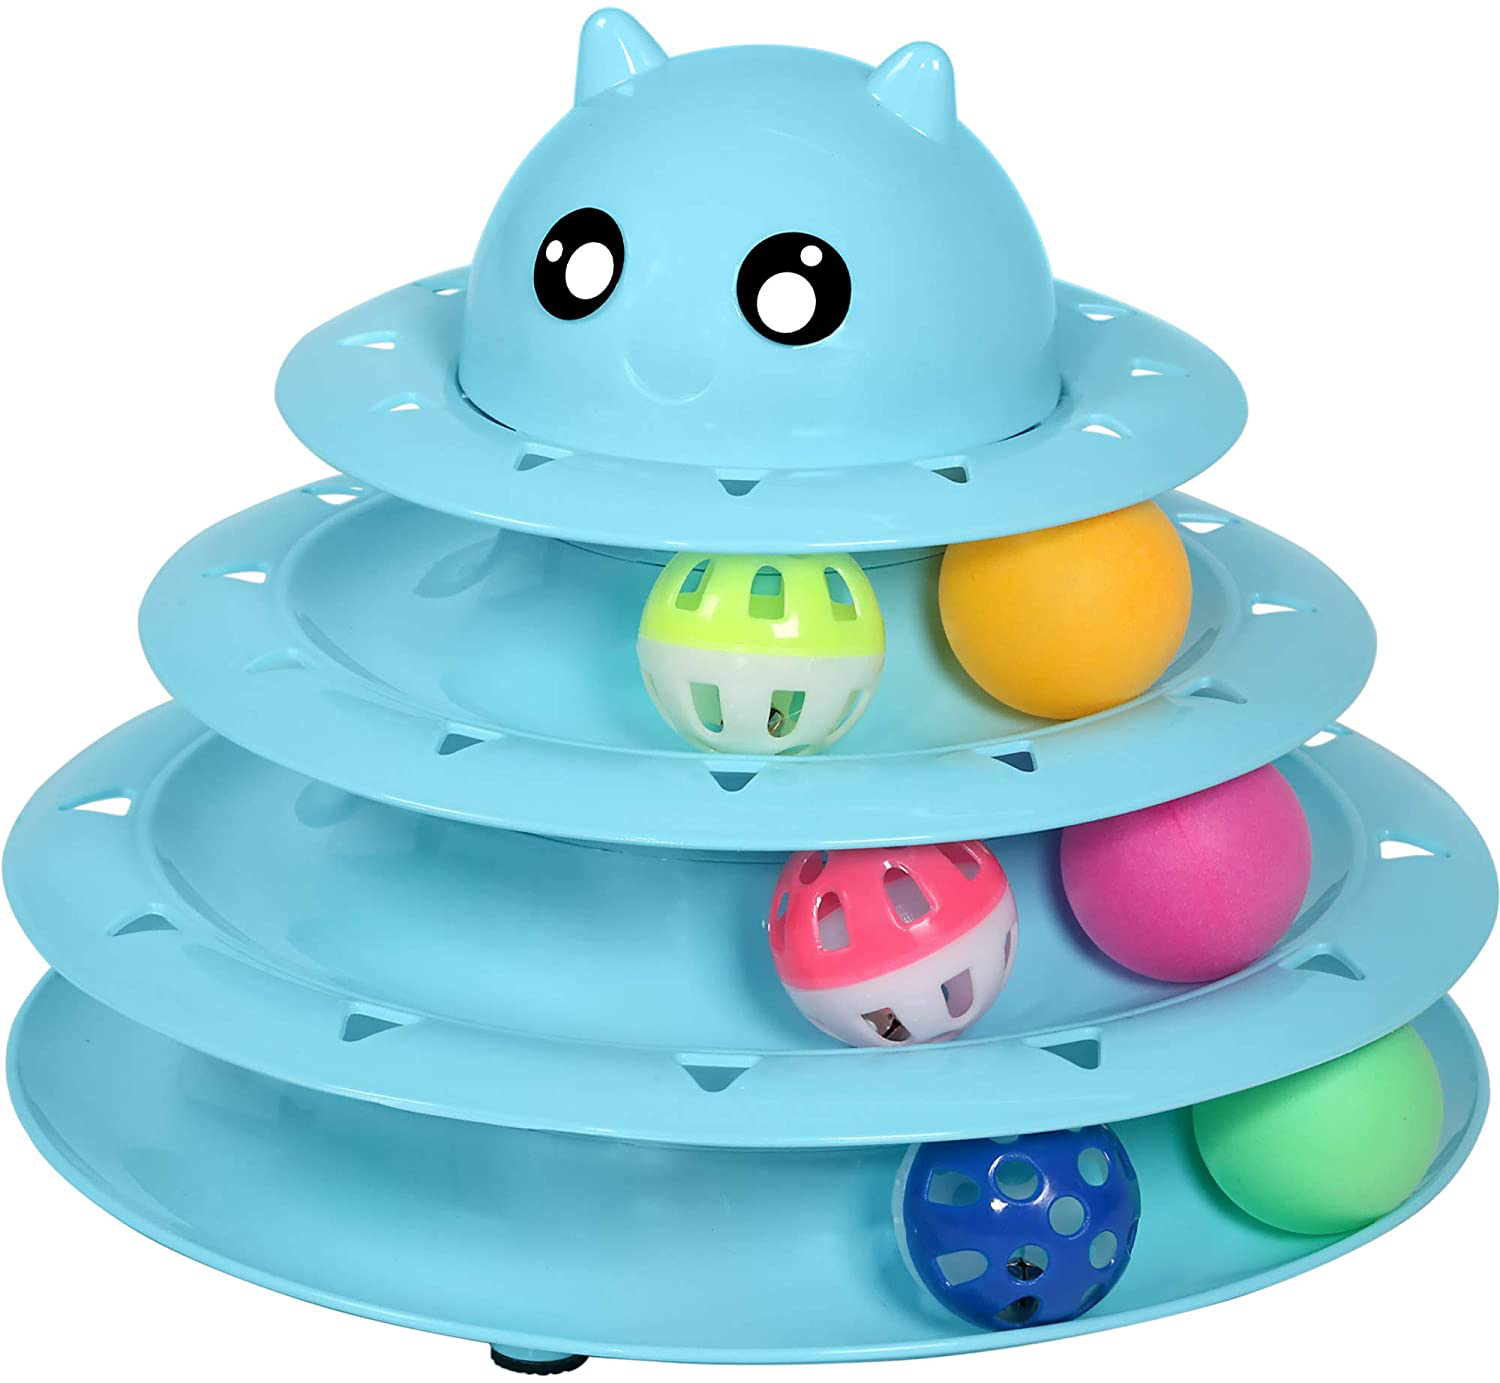 UPSKY Cat Toy Roller 3-Level Turntable Cat Toys Balls with Six Colorful Balls Interactive Kitten Fun Mental Physical Exercise Puzzle Kitten Toys. Animals & Pet Supplies > Pet Supplies > Dog Supplies > Dog Treadmills UPSKY blue  